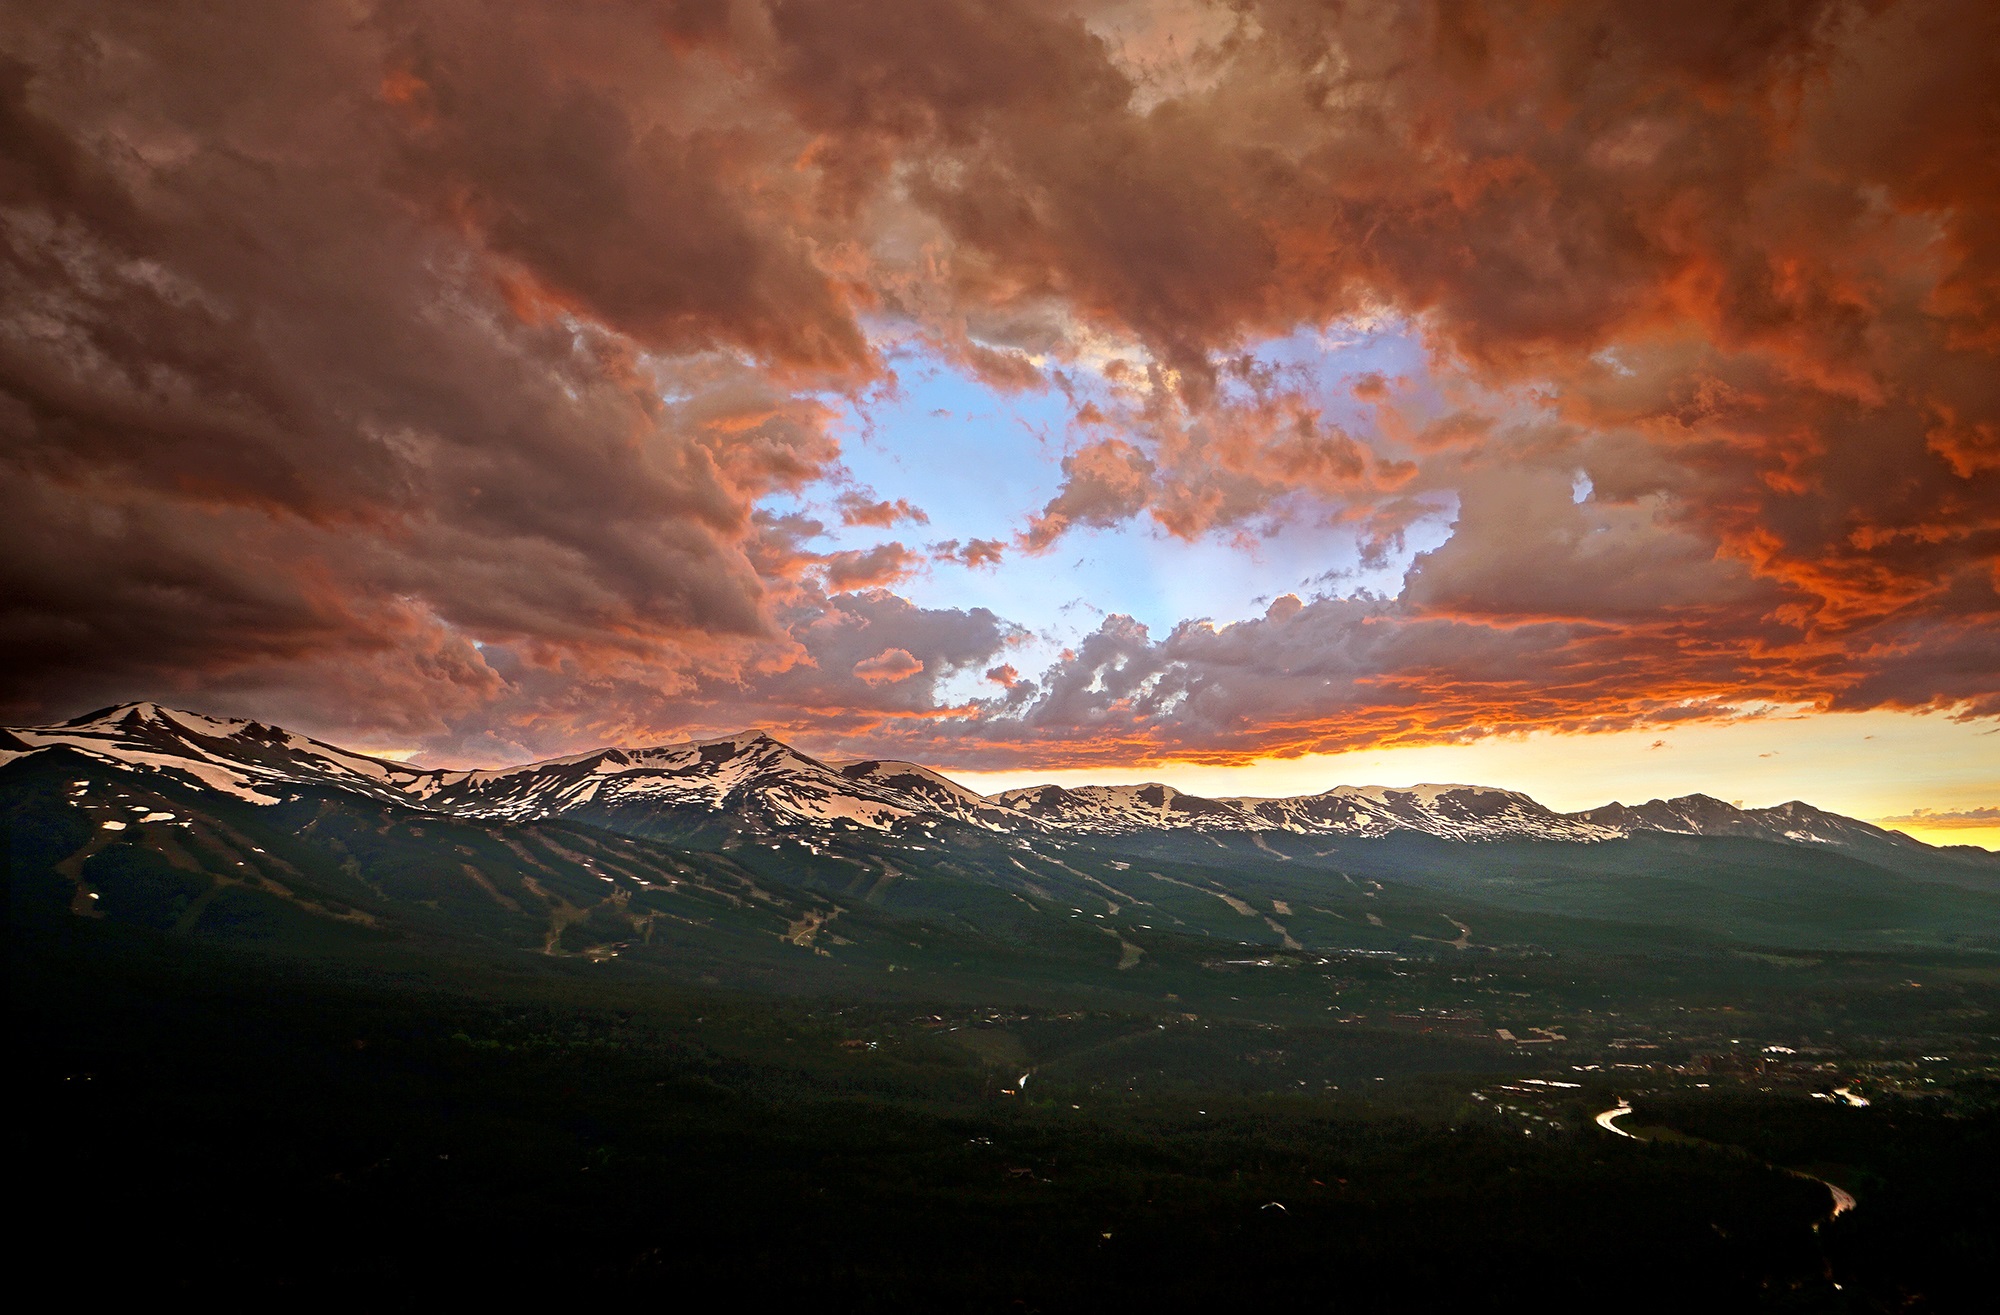 Storms clouds over the Breckenridge mountains